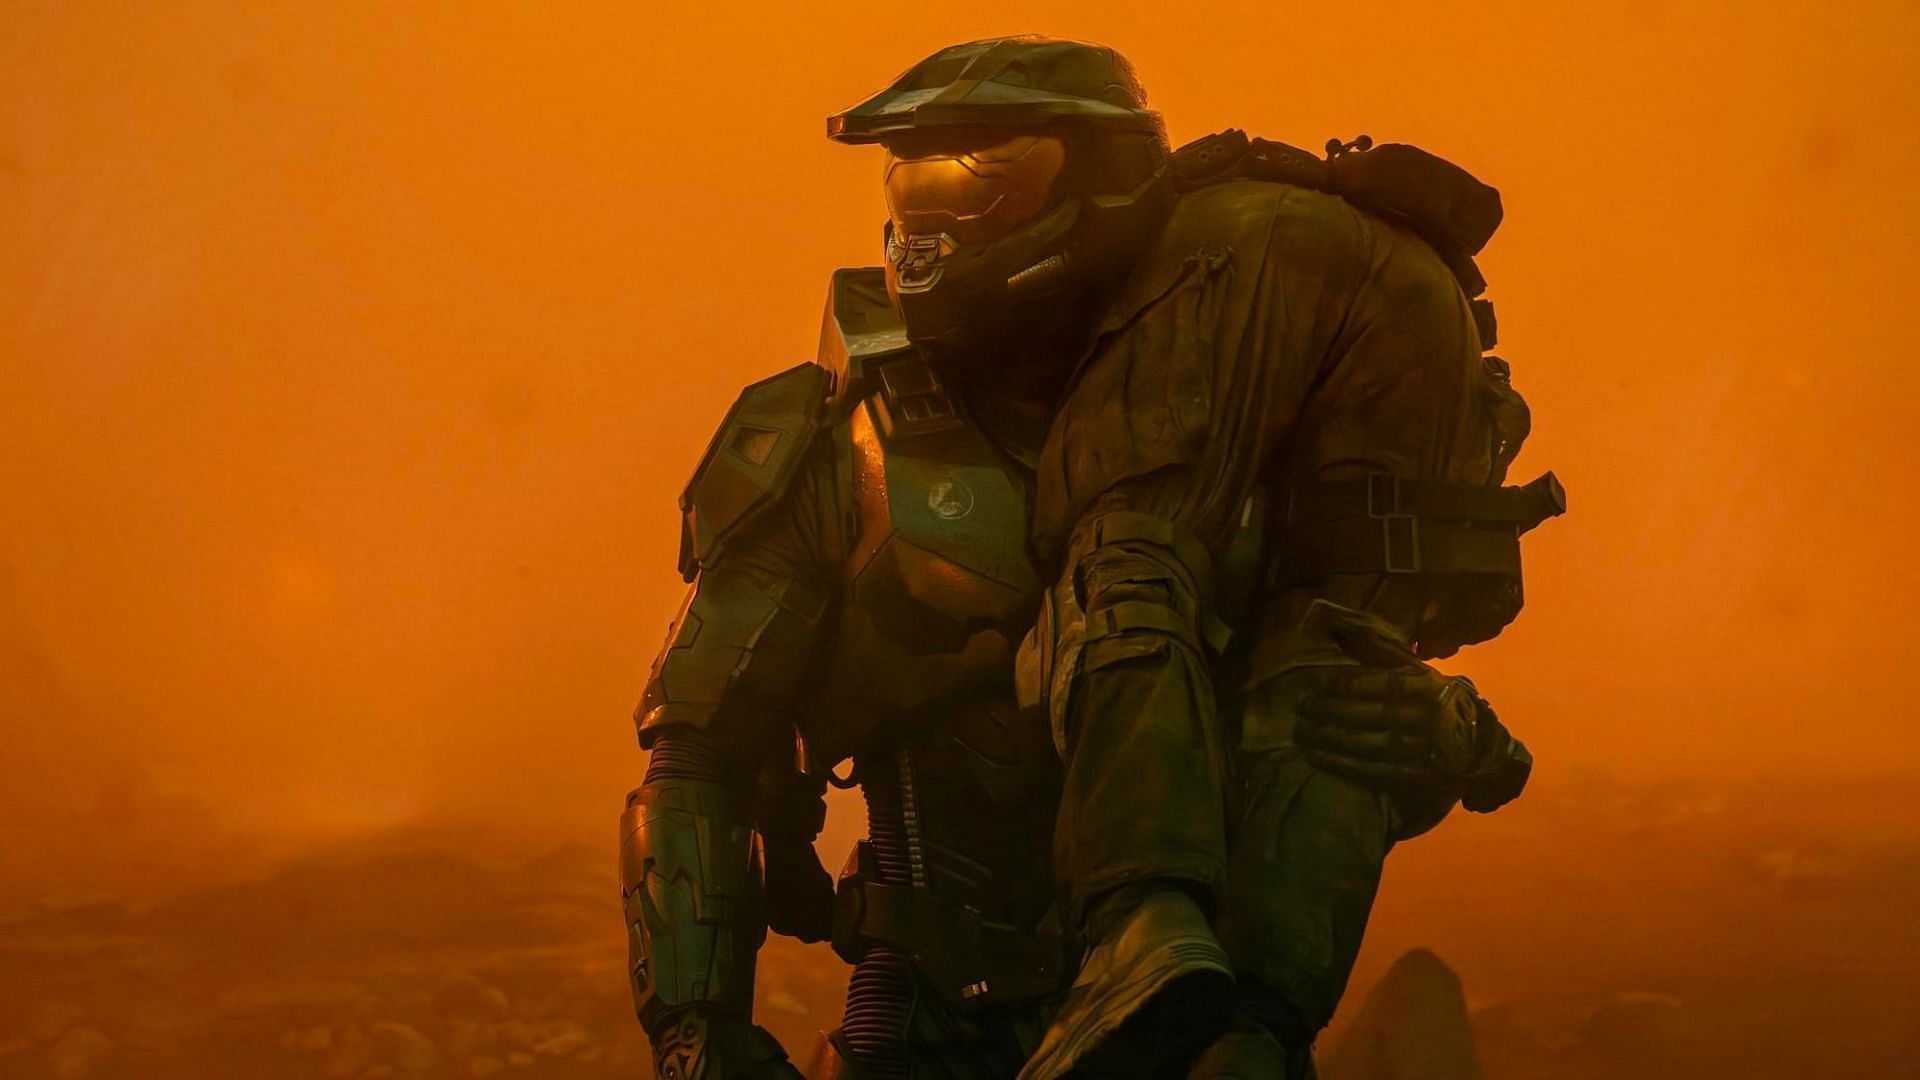 This Halo Season 2 episode has a lot going on. (Image via Paramount+, official trailer thumbnail)